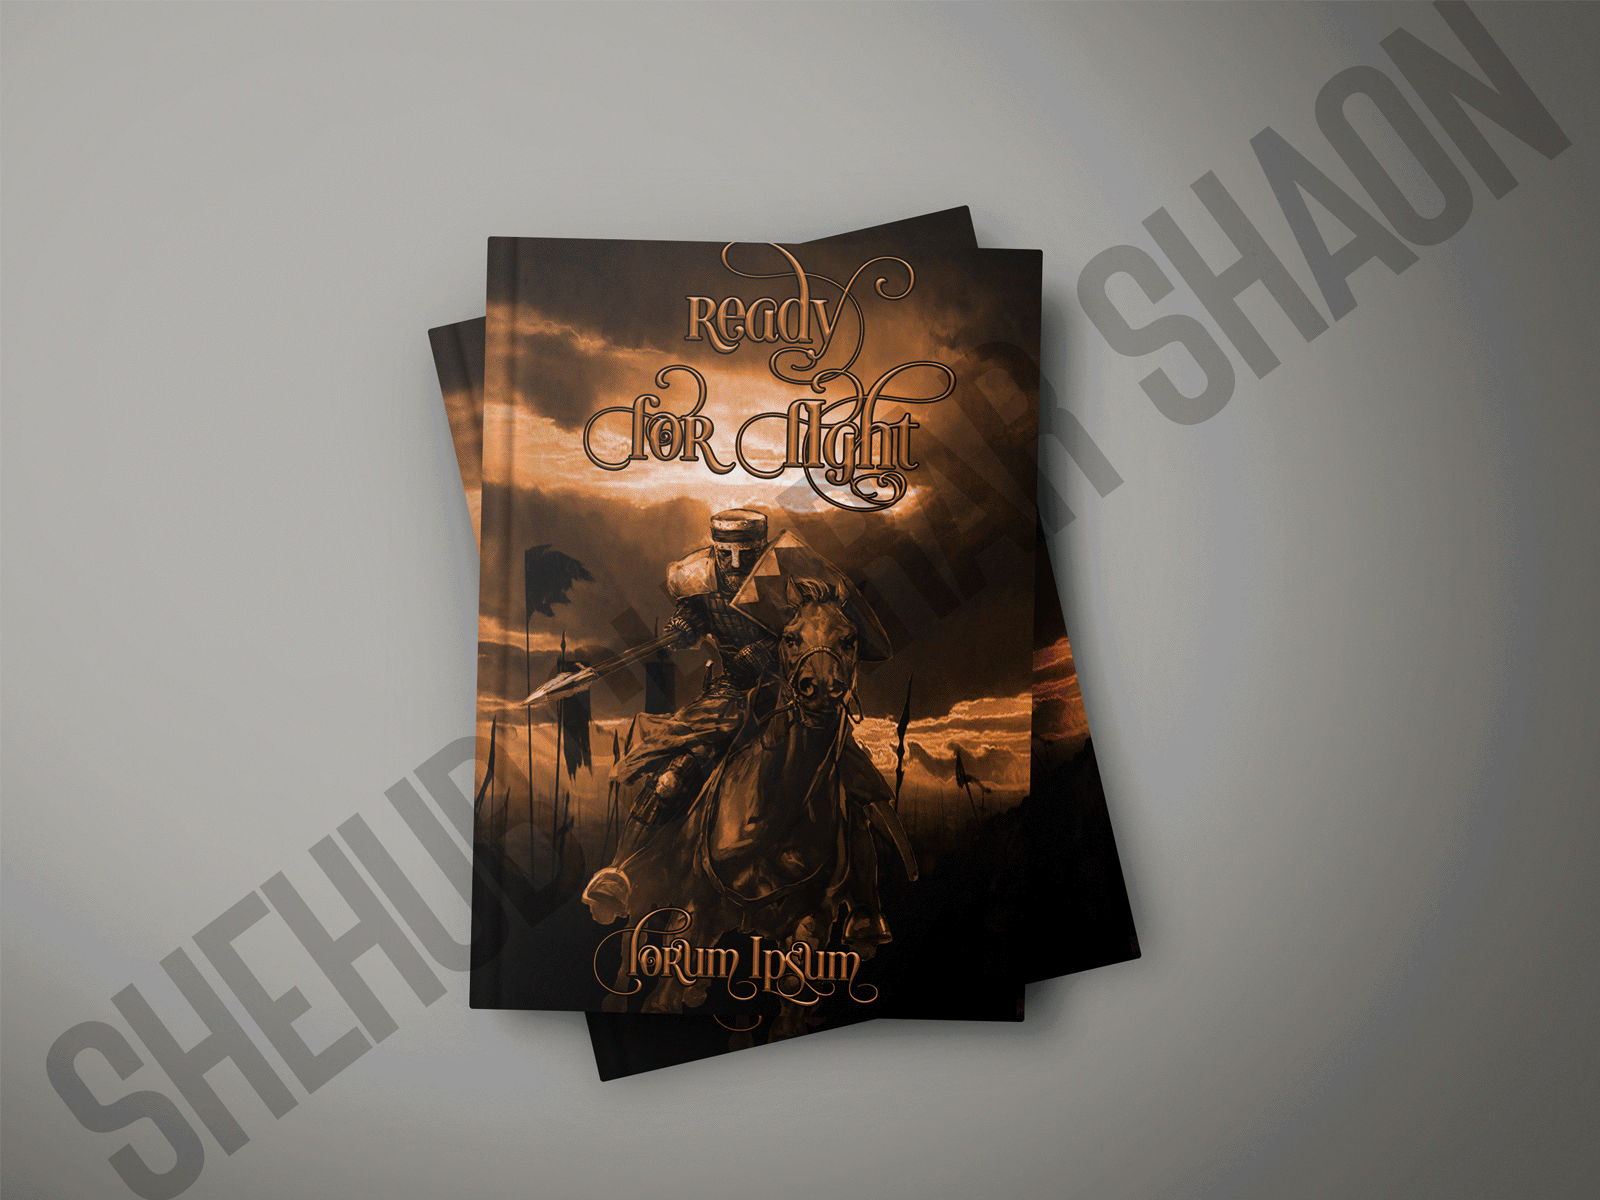 READY FOR FIGHT book book cover design bookbranding bookish branding cover cover design design digital artwork ebook ebook cover ebook cover design fantasy book cover graphic design photo editing photo manipulation photo retouch professional selfpub selfpublishing